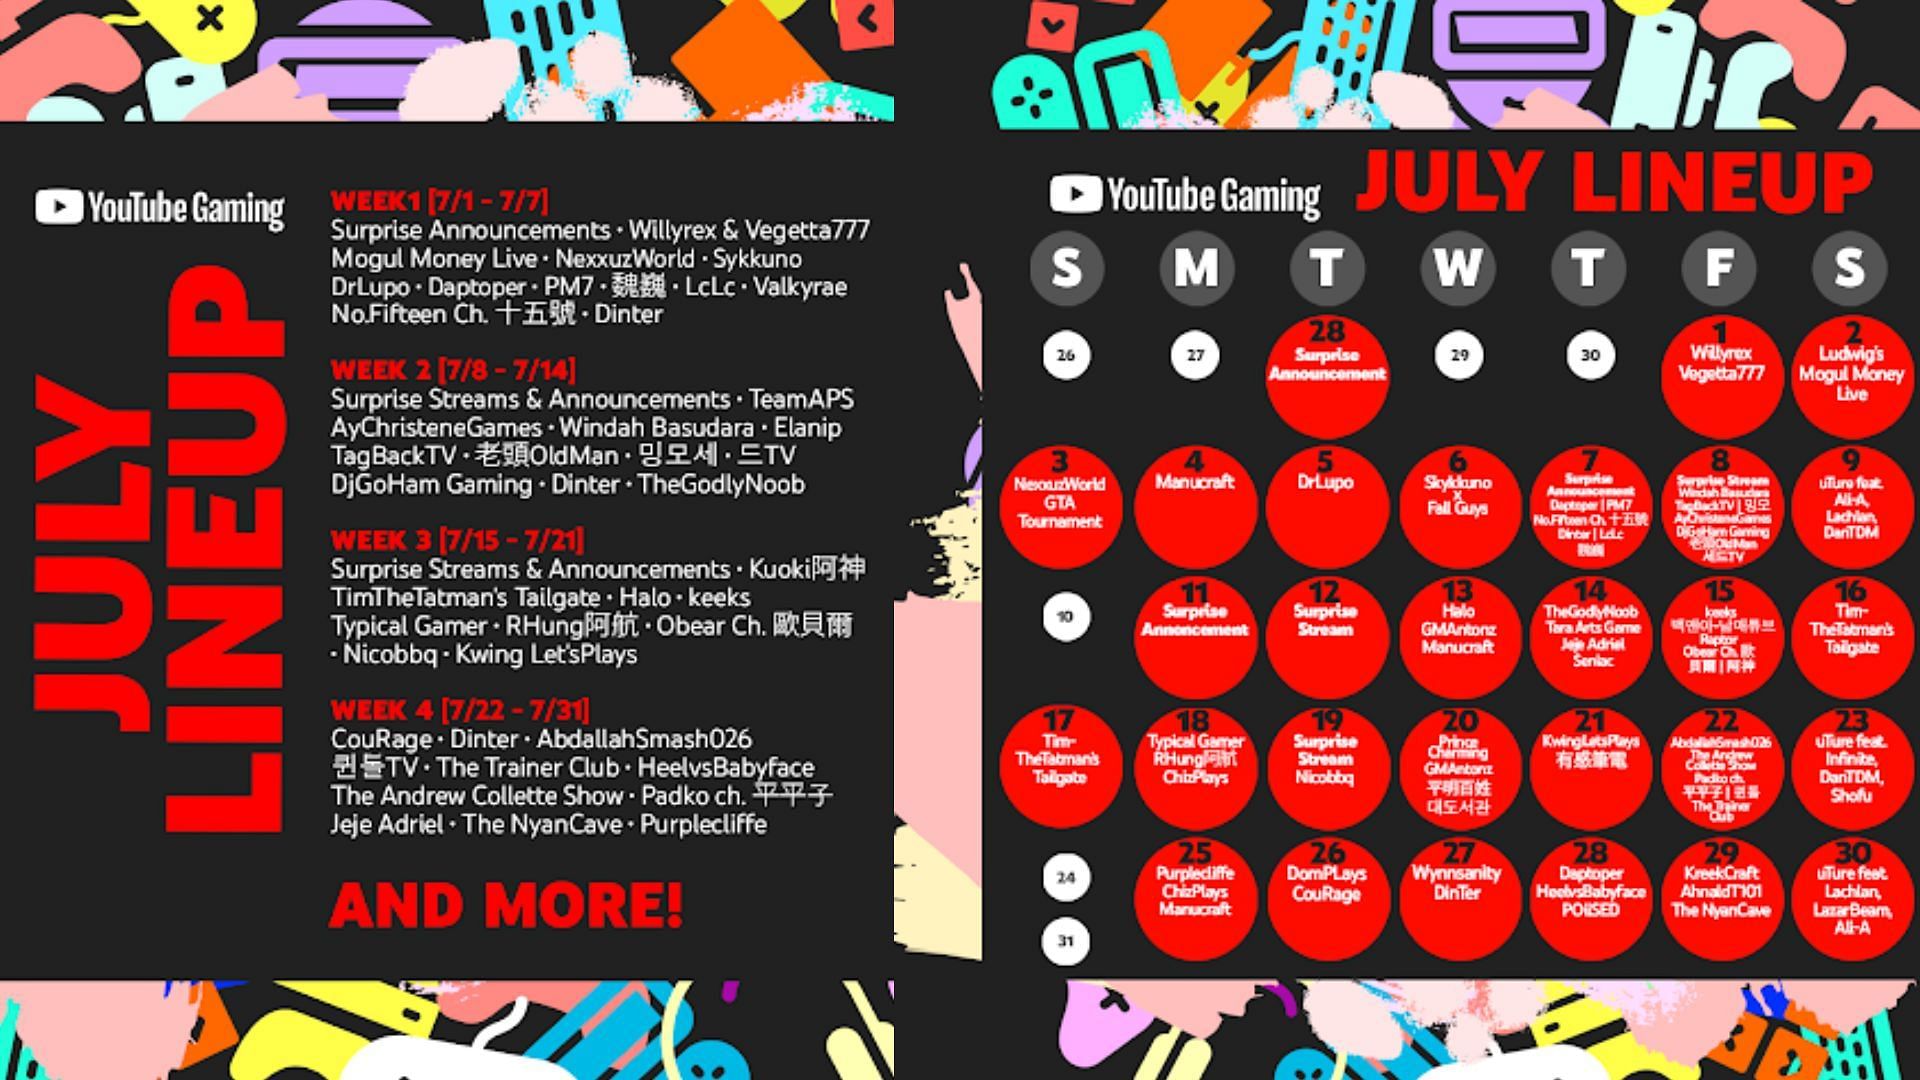 YouTube gaming July Lineup has a &quot;Special Announcement&quot; slated for this week (Image via YouTube Gaming)